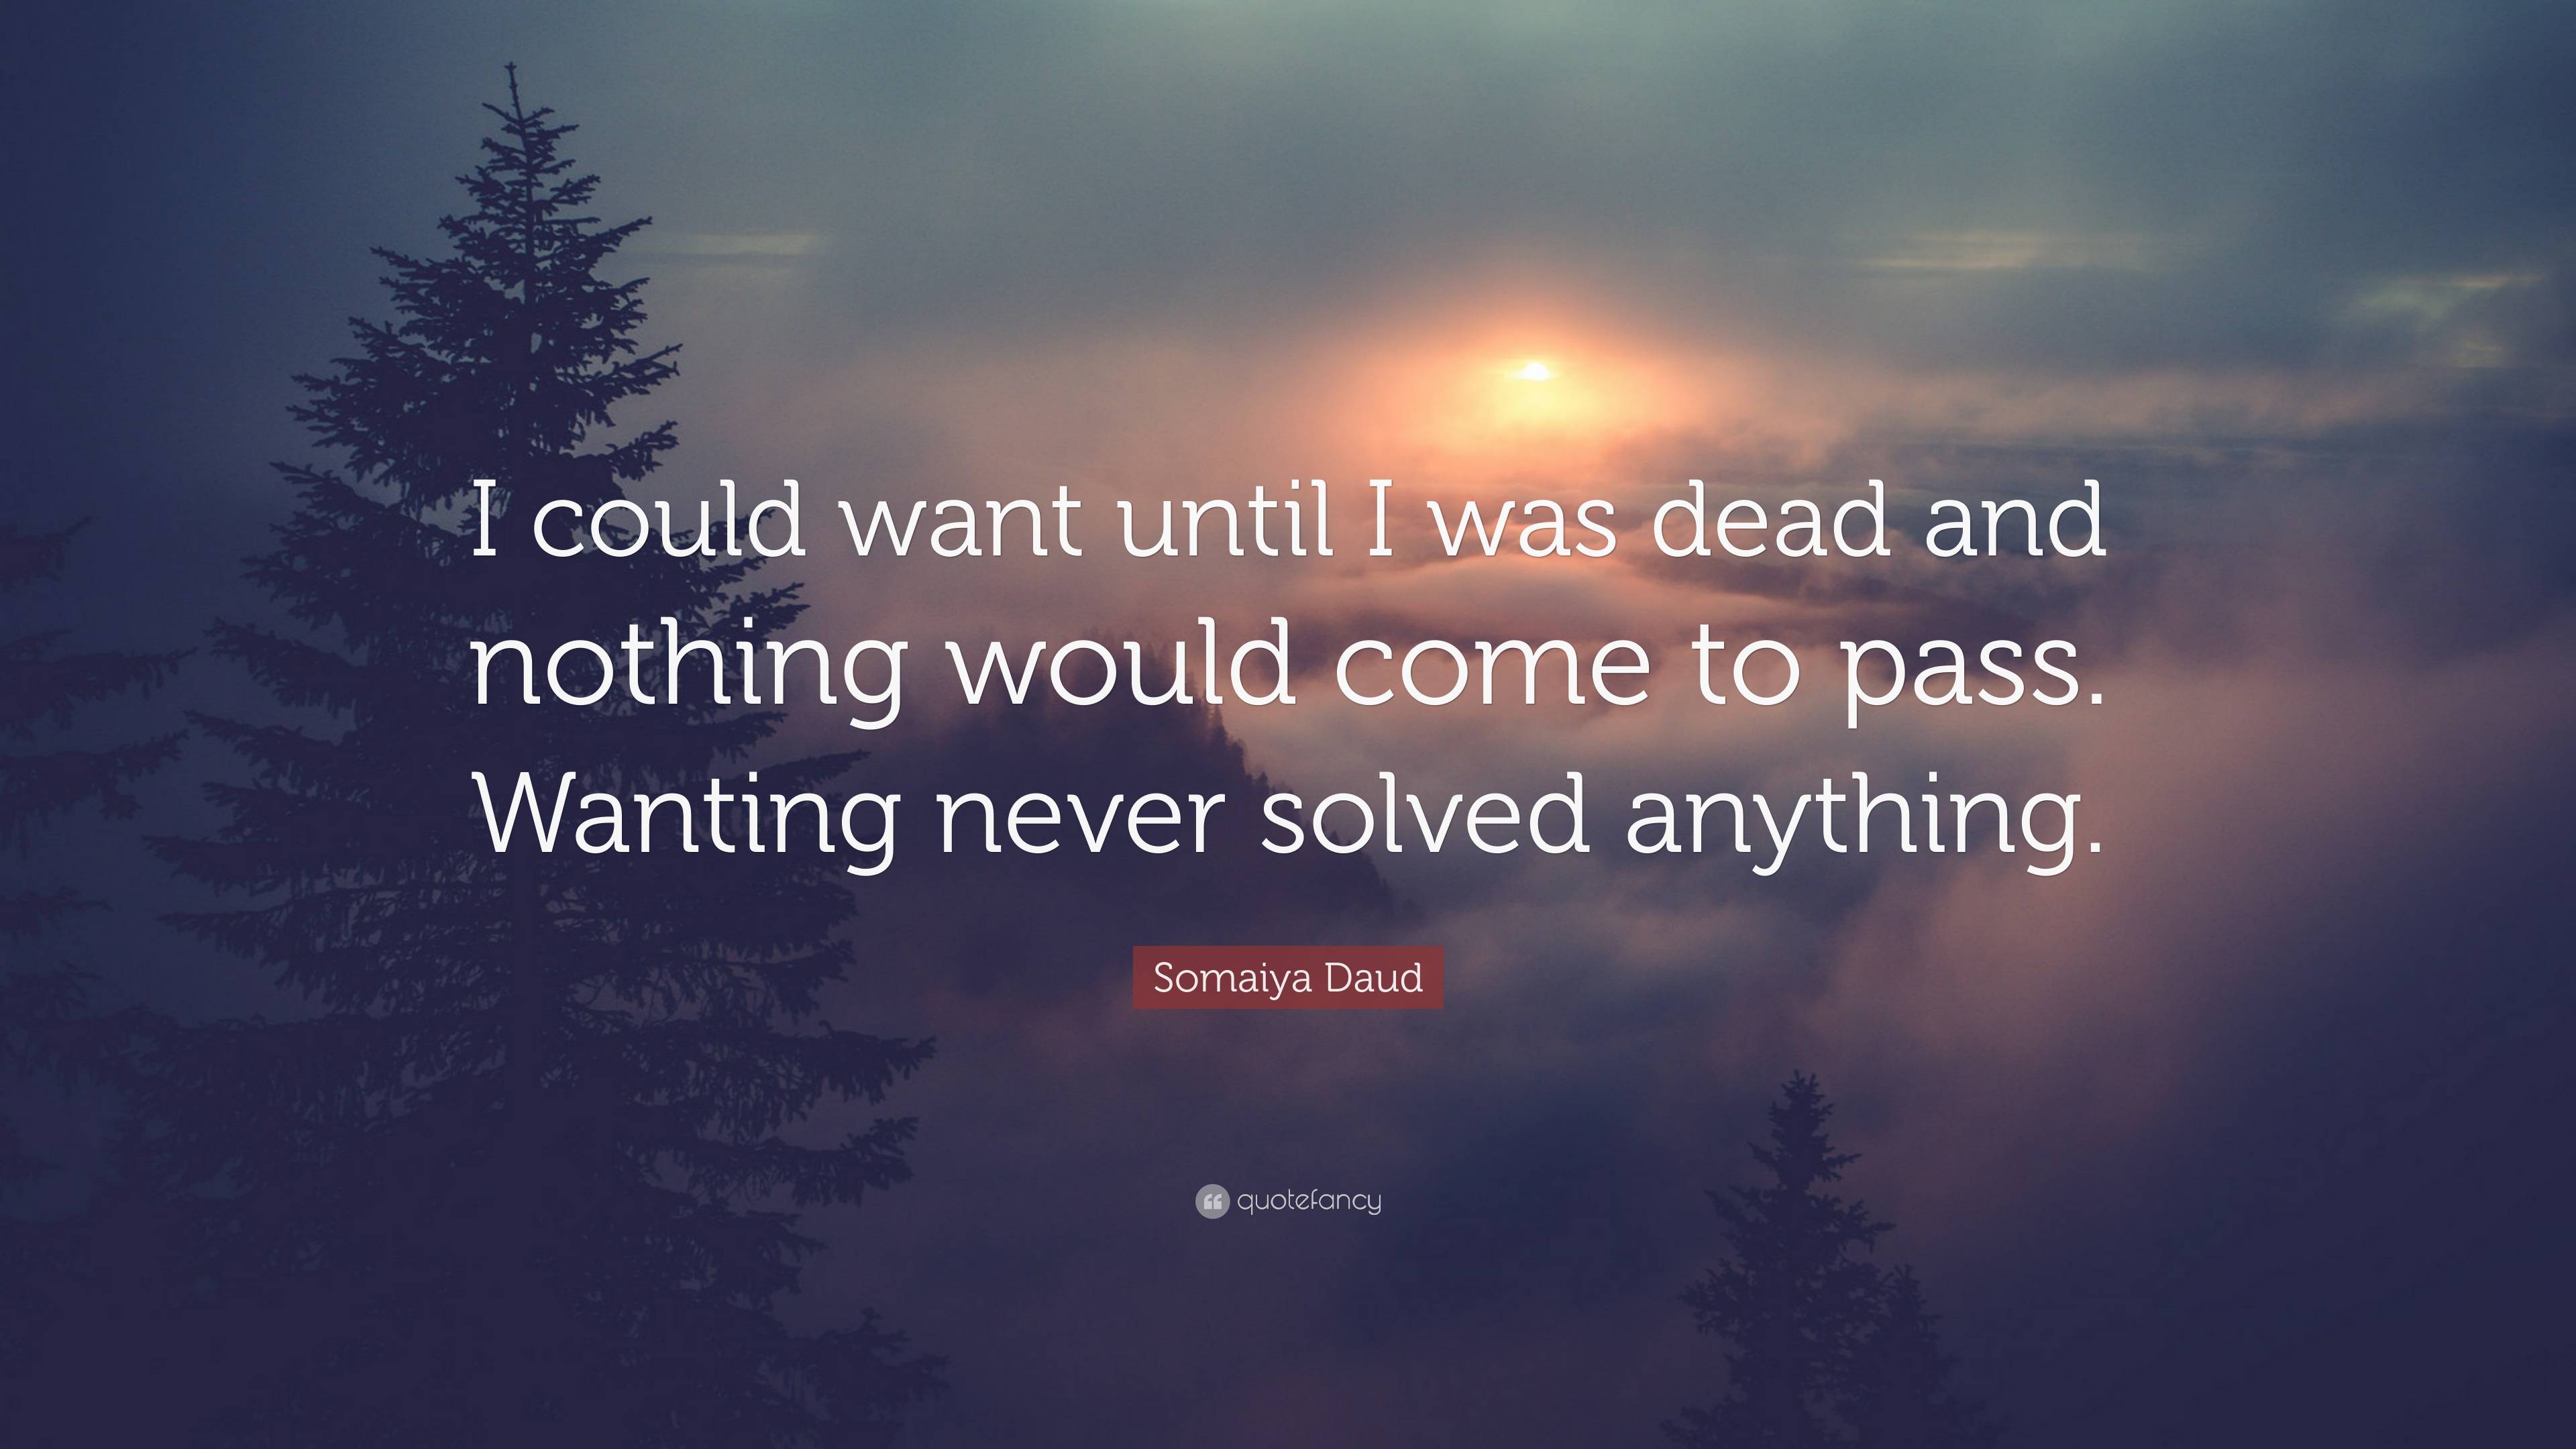 Somaiya Daud Quote: “I could want until I was dead and nothing would ...